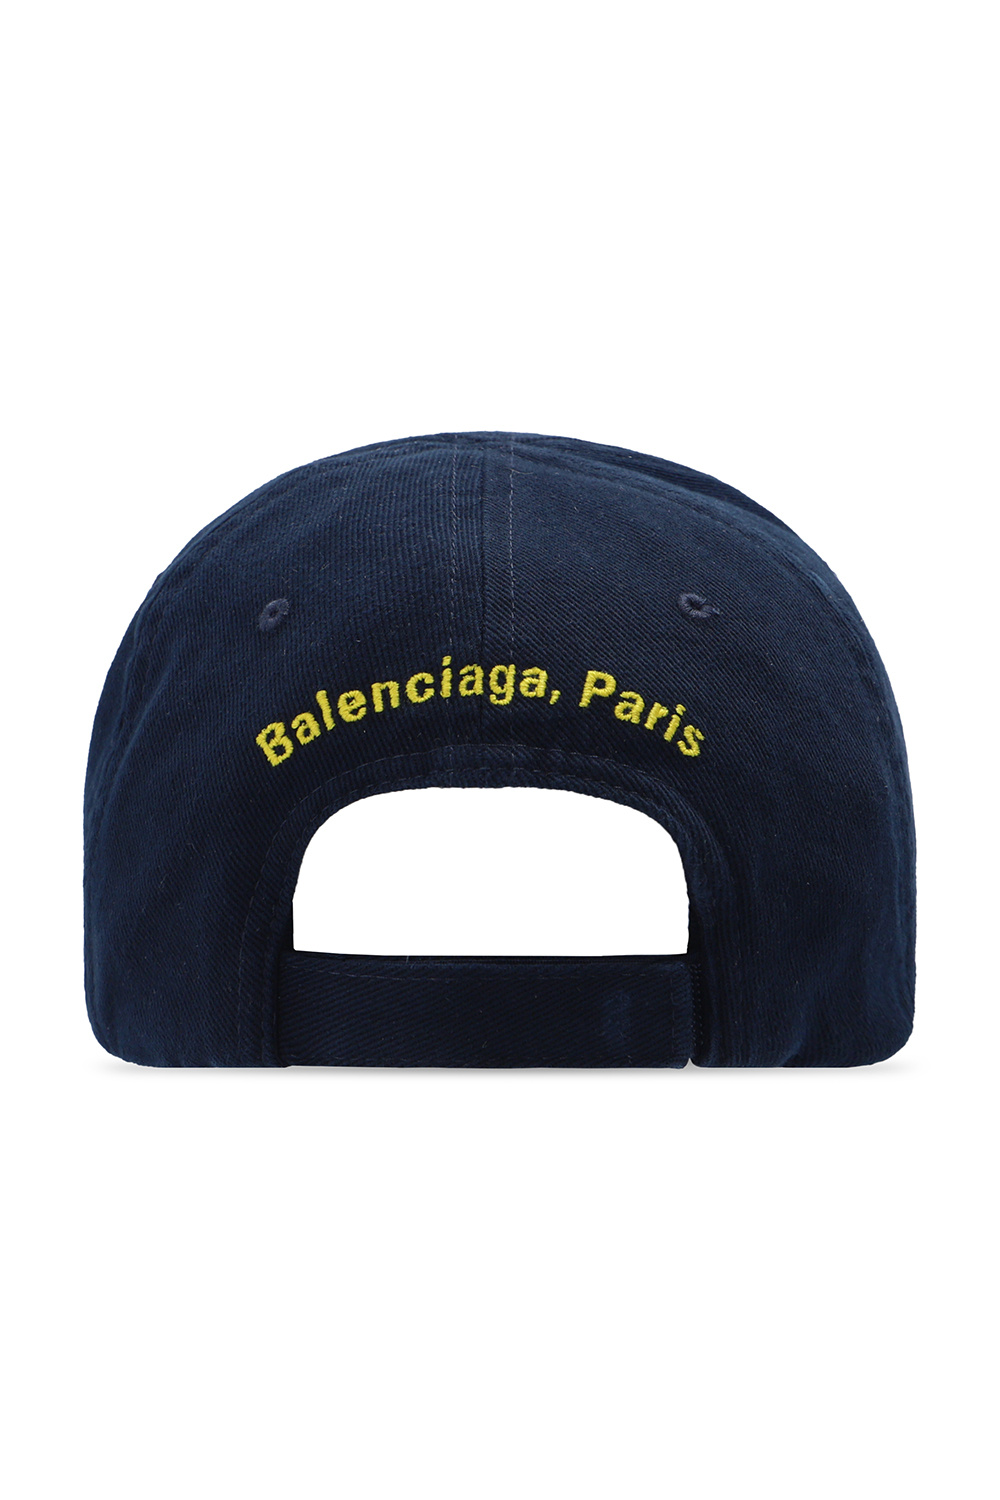 Balenciaga Adventure Relaxed Fit Cotton Ripstop Strackpack Cap